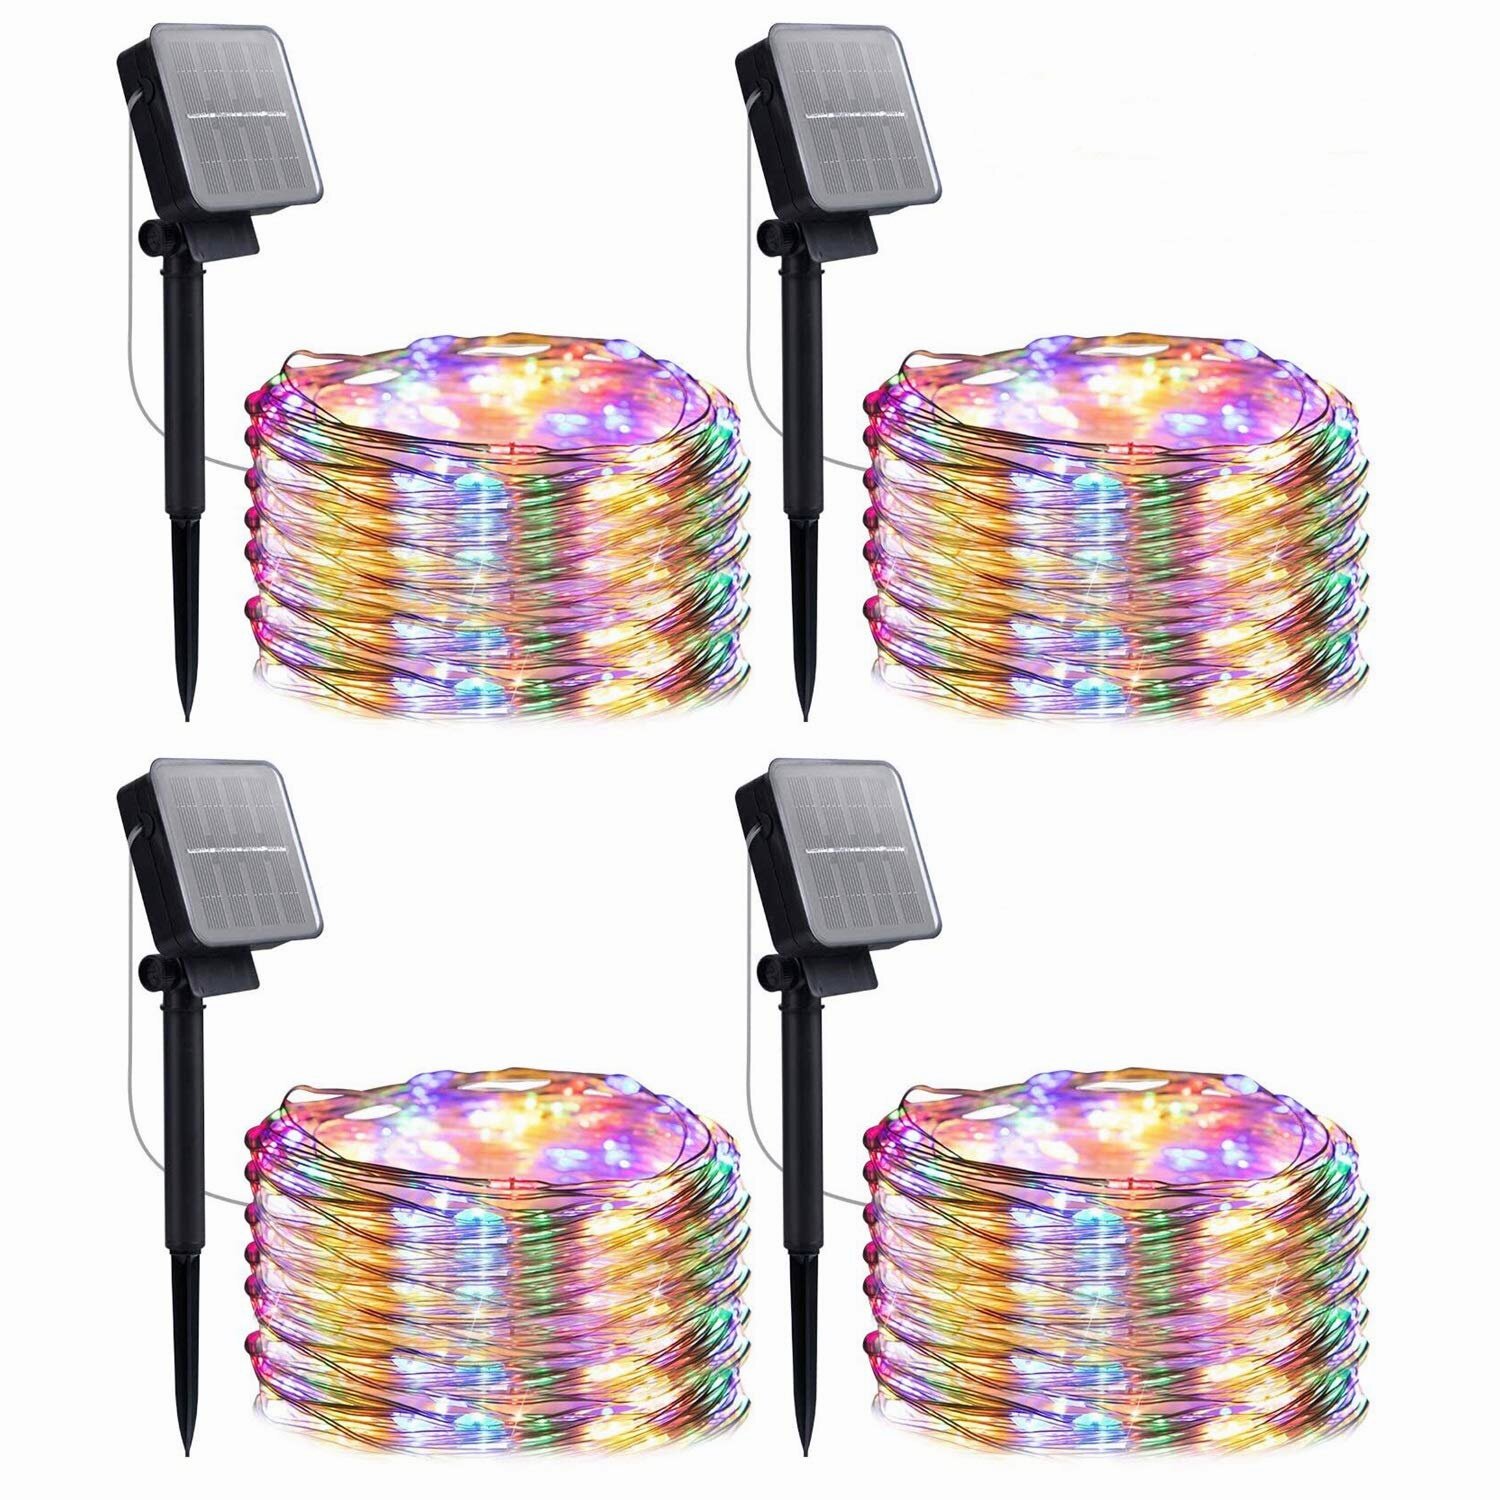 100 Solar Powered Outdoor LED Fairy Lights 4 Color Christmas Holiday Lights.